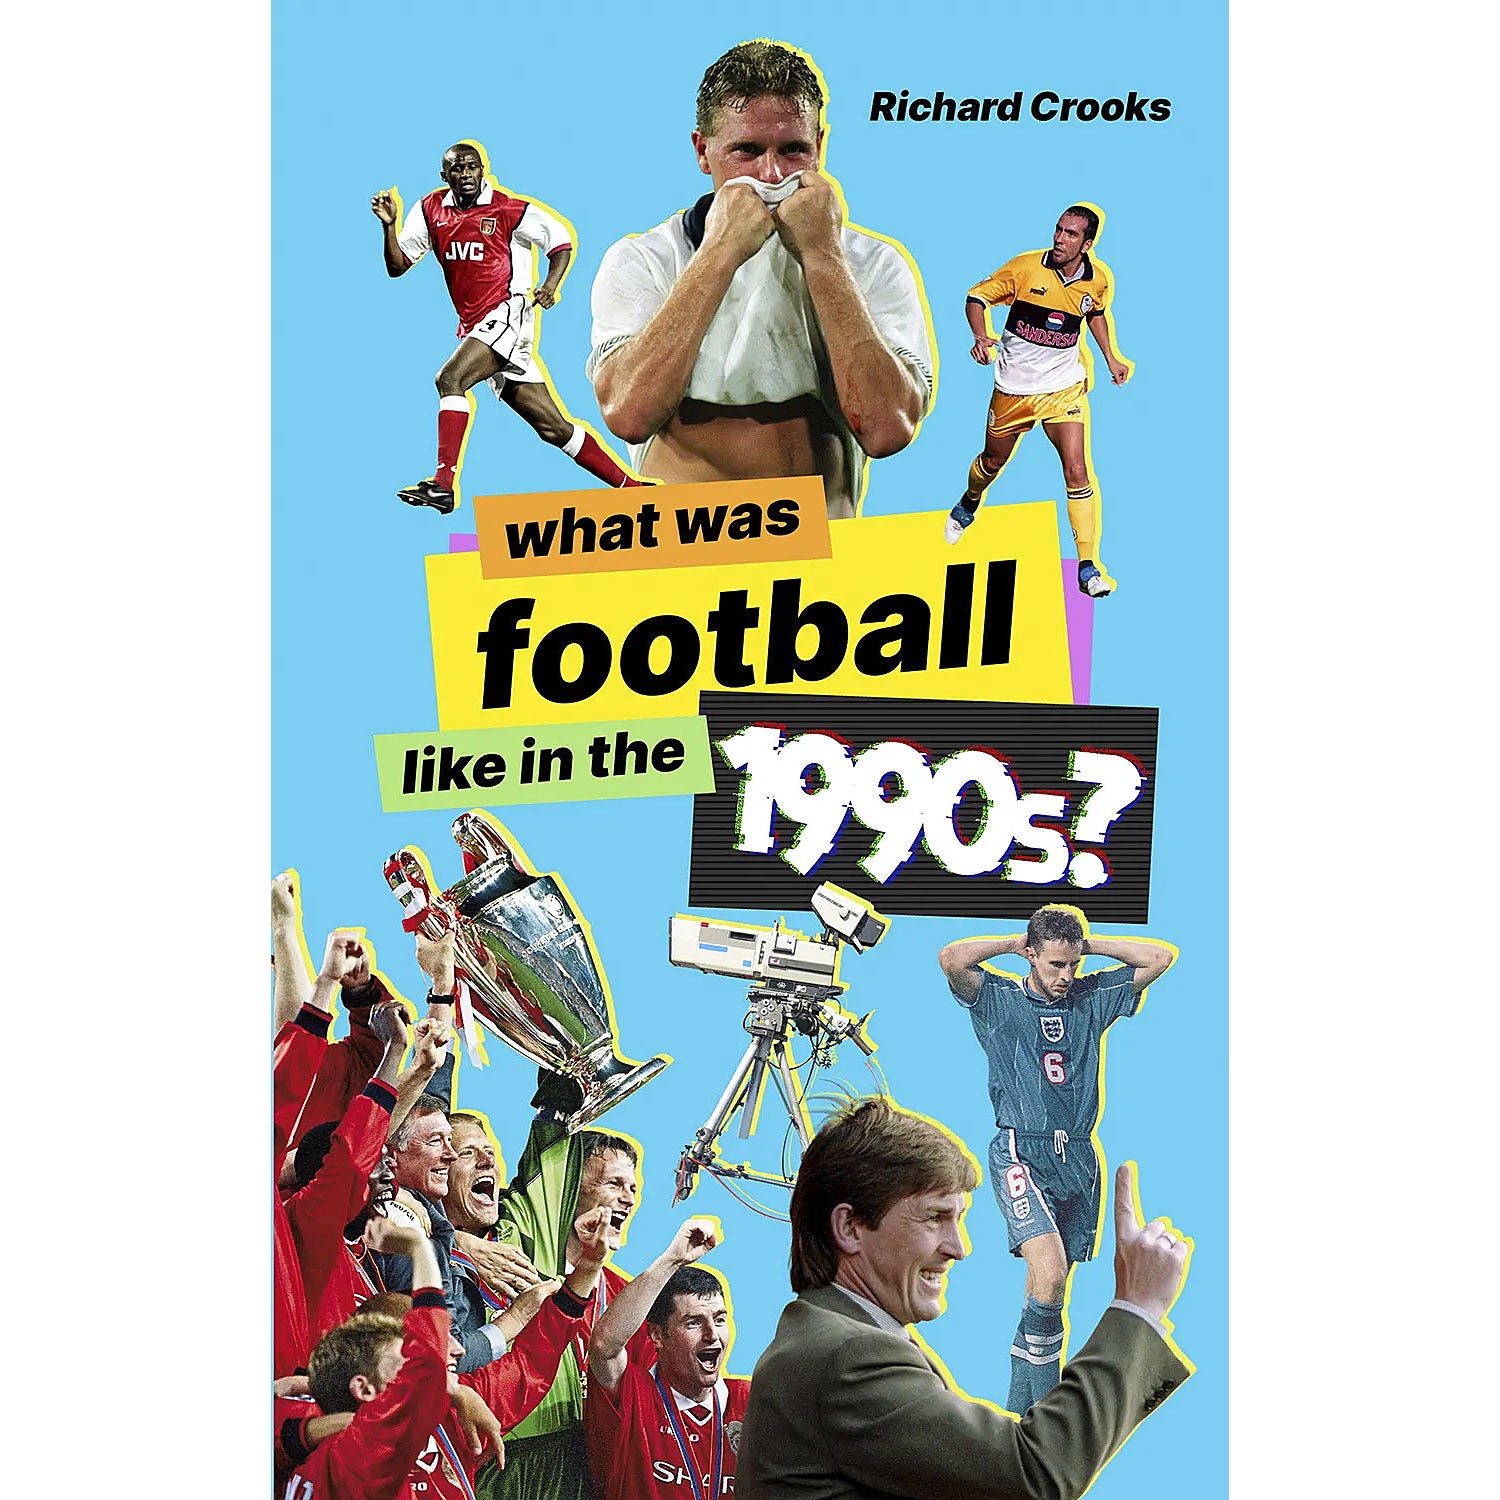 What was football like in the 1990s?